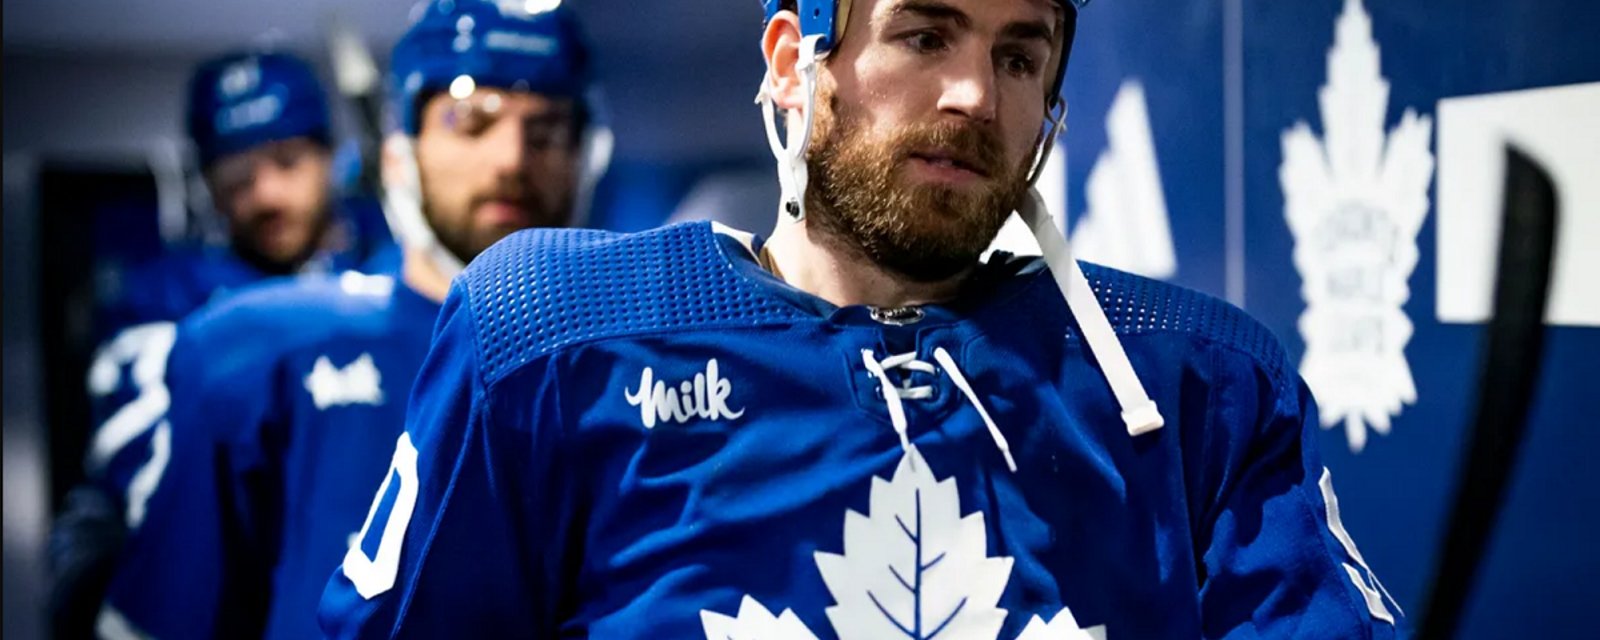 Ryan O'Reilly snubs the Leafs on Day 1 of Free Agency.